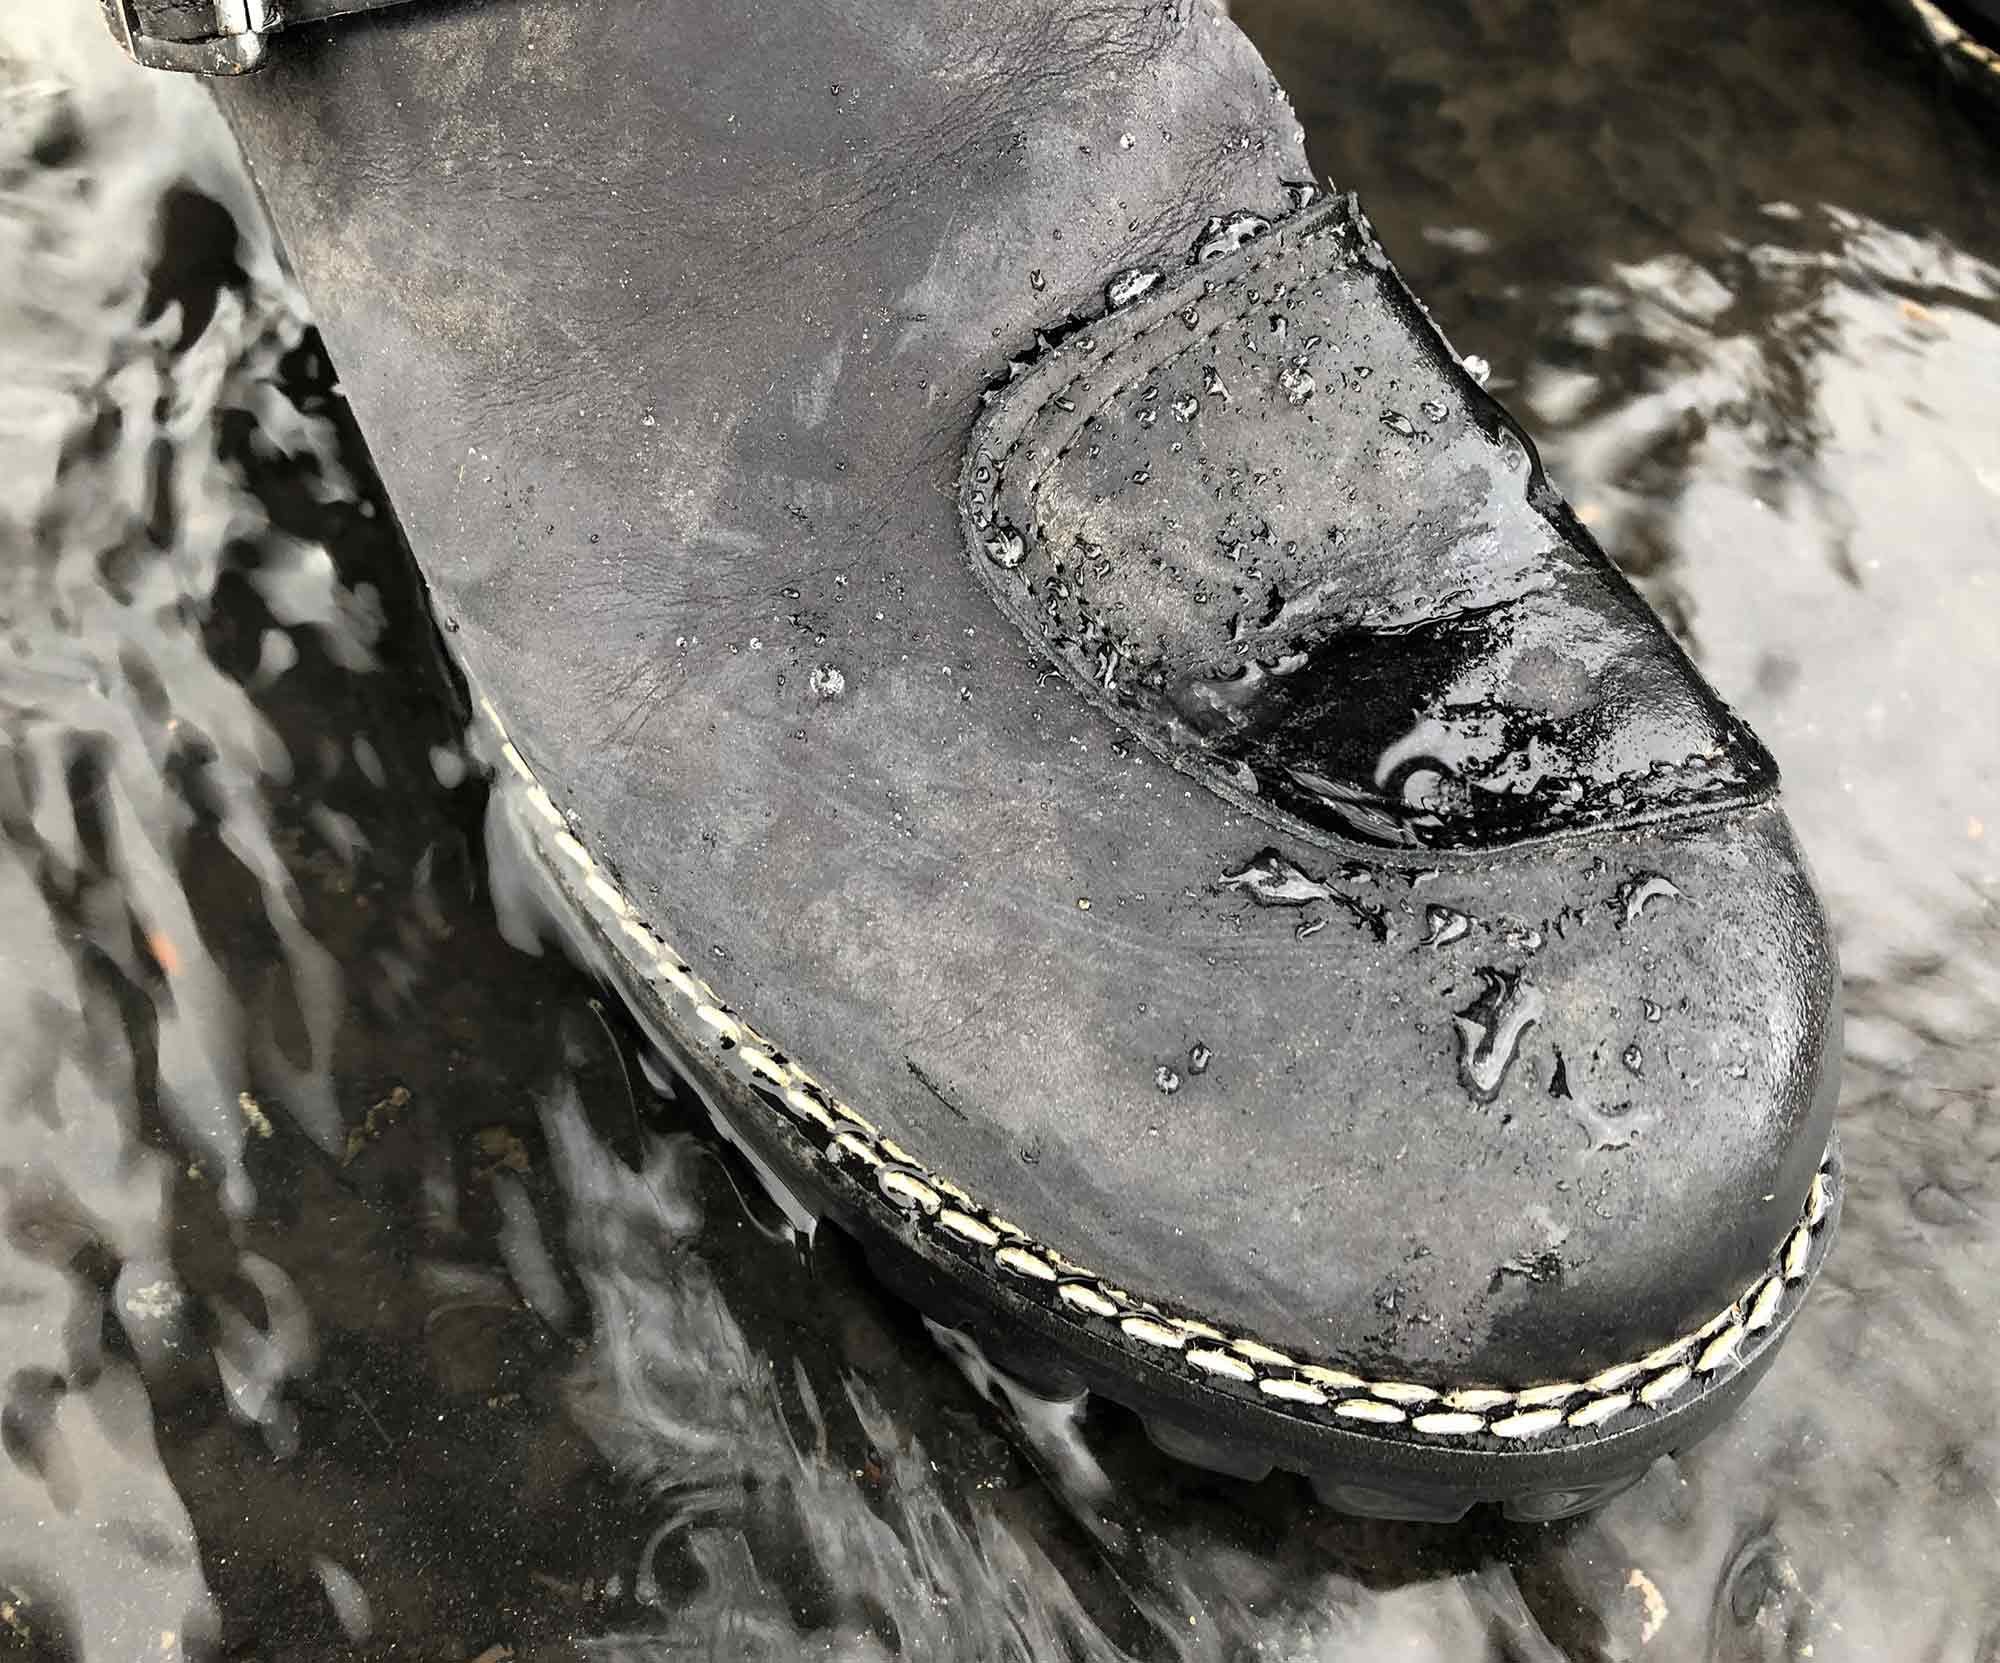 Although outer leather is said to be only water-repellent, we found it fairly effective at keeping liquid at bay in showery conditions.